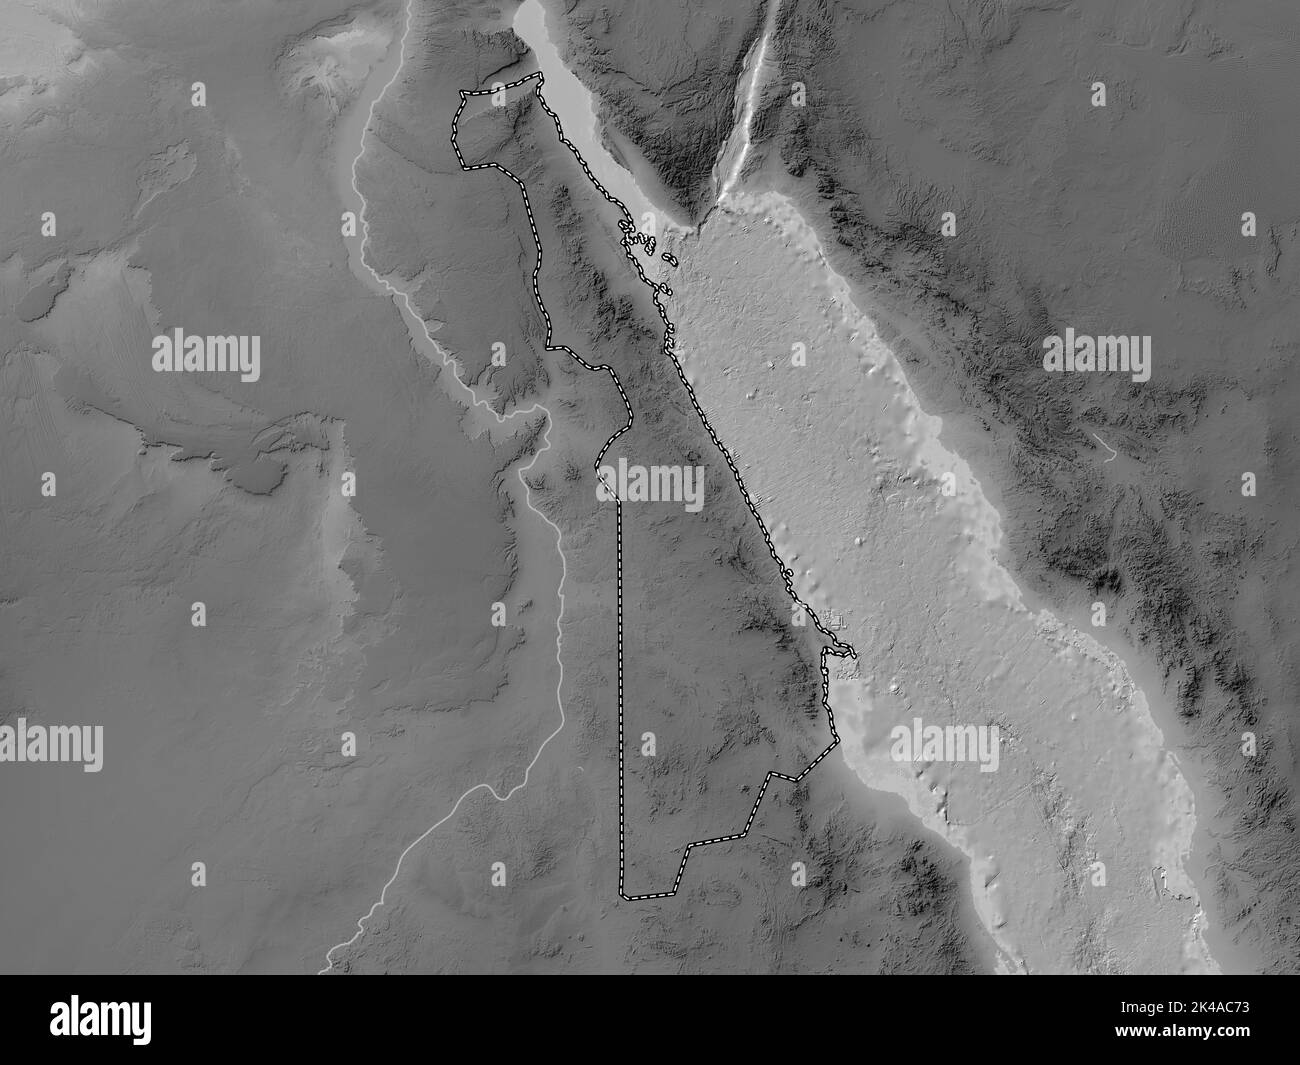 Al Bahr al Ahmar, governorate of Egypt. Grayscale elevation map with lakes and rivers Stock Photo